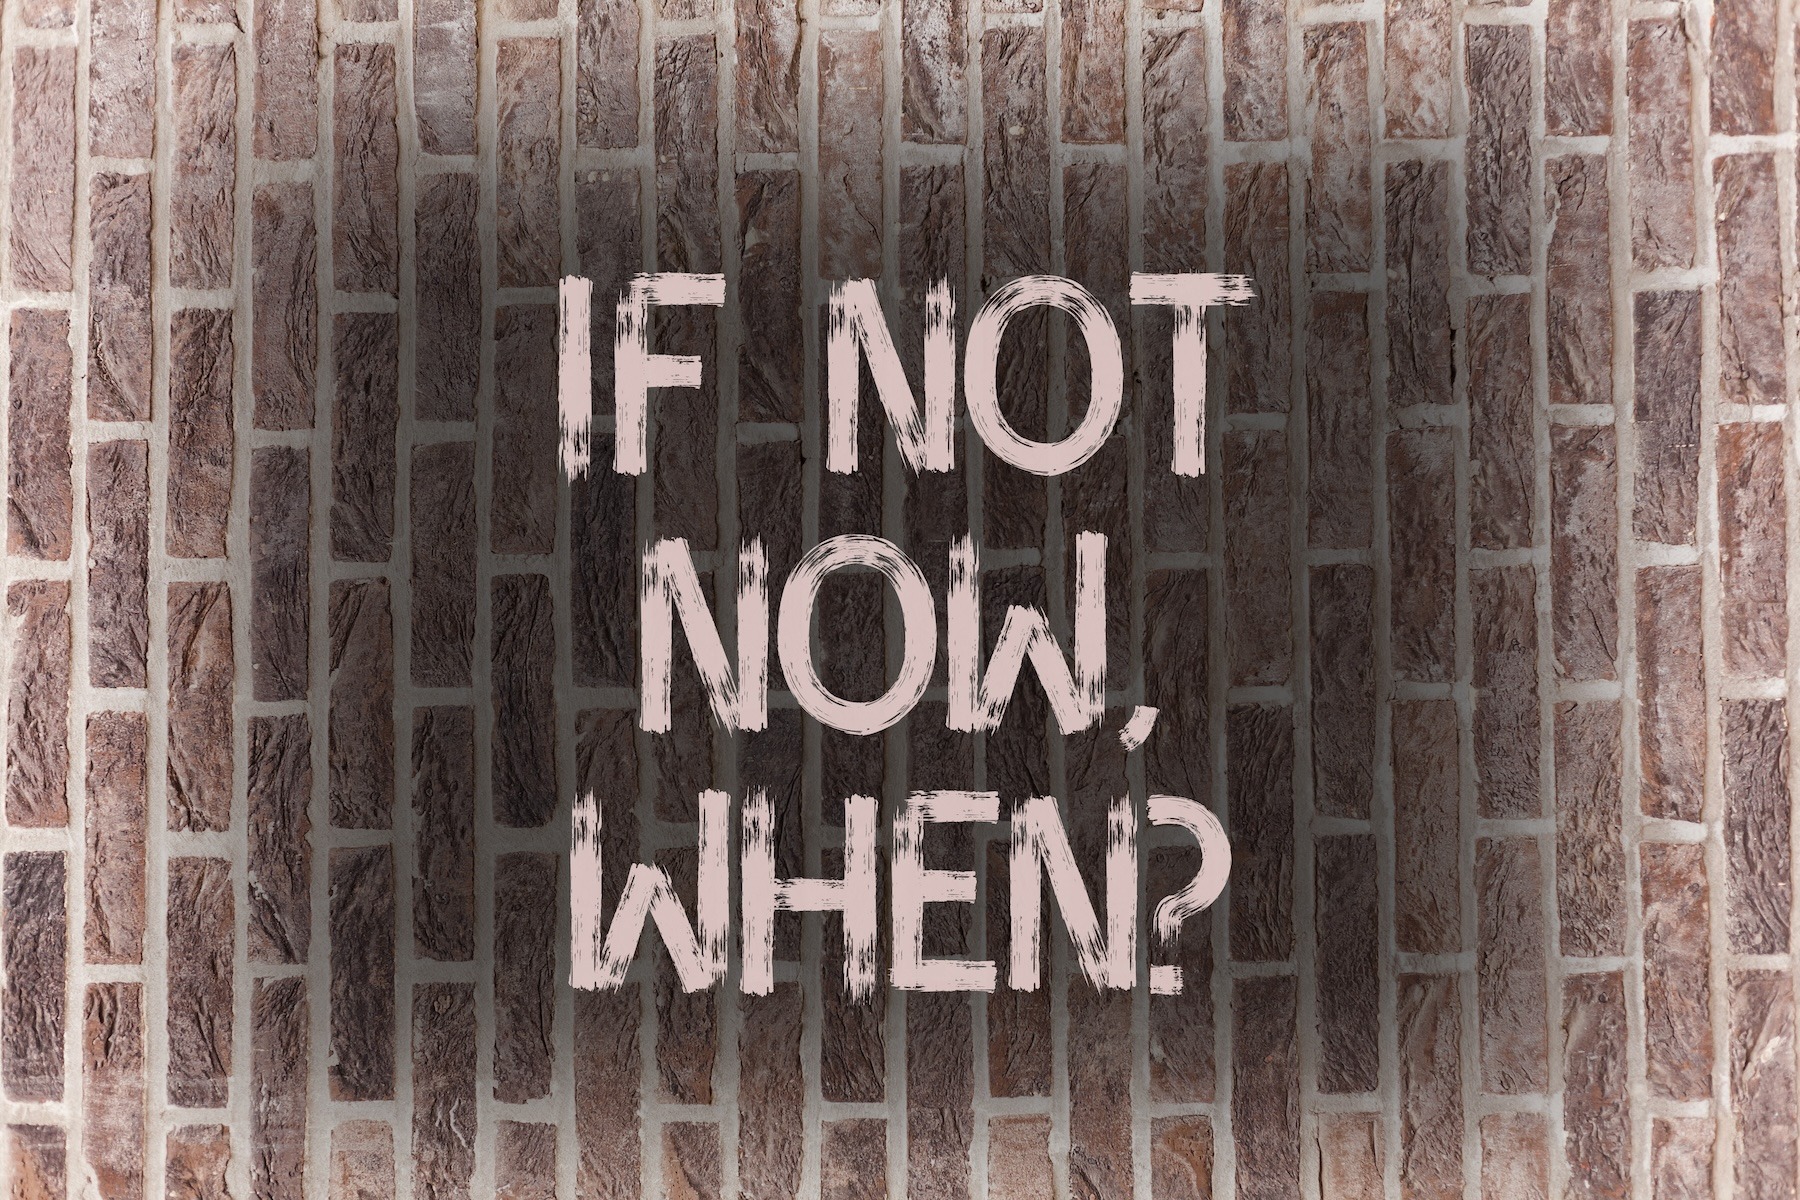 Estate Planning. Updating Your Last Will and Testament. An image of a brick wall, with “IF NOT NOW, WHEN?” in large letters.